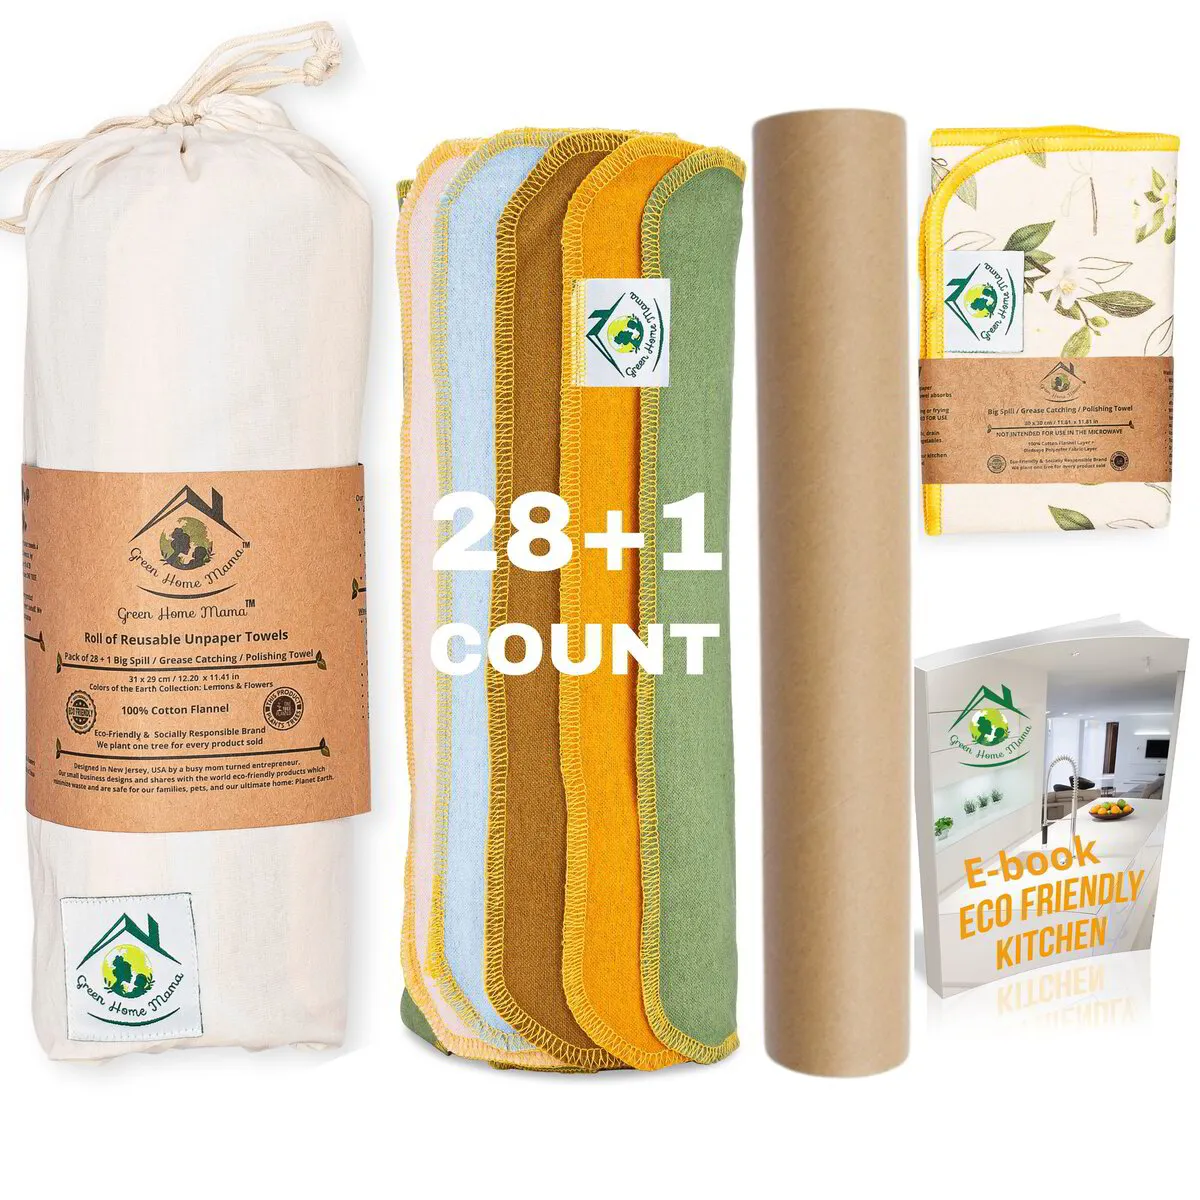 45% OFF BEACHSCAPE Roll of 28 Reusable Unpaper Towels with Bonuses